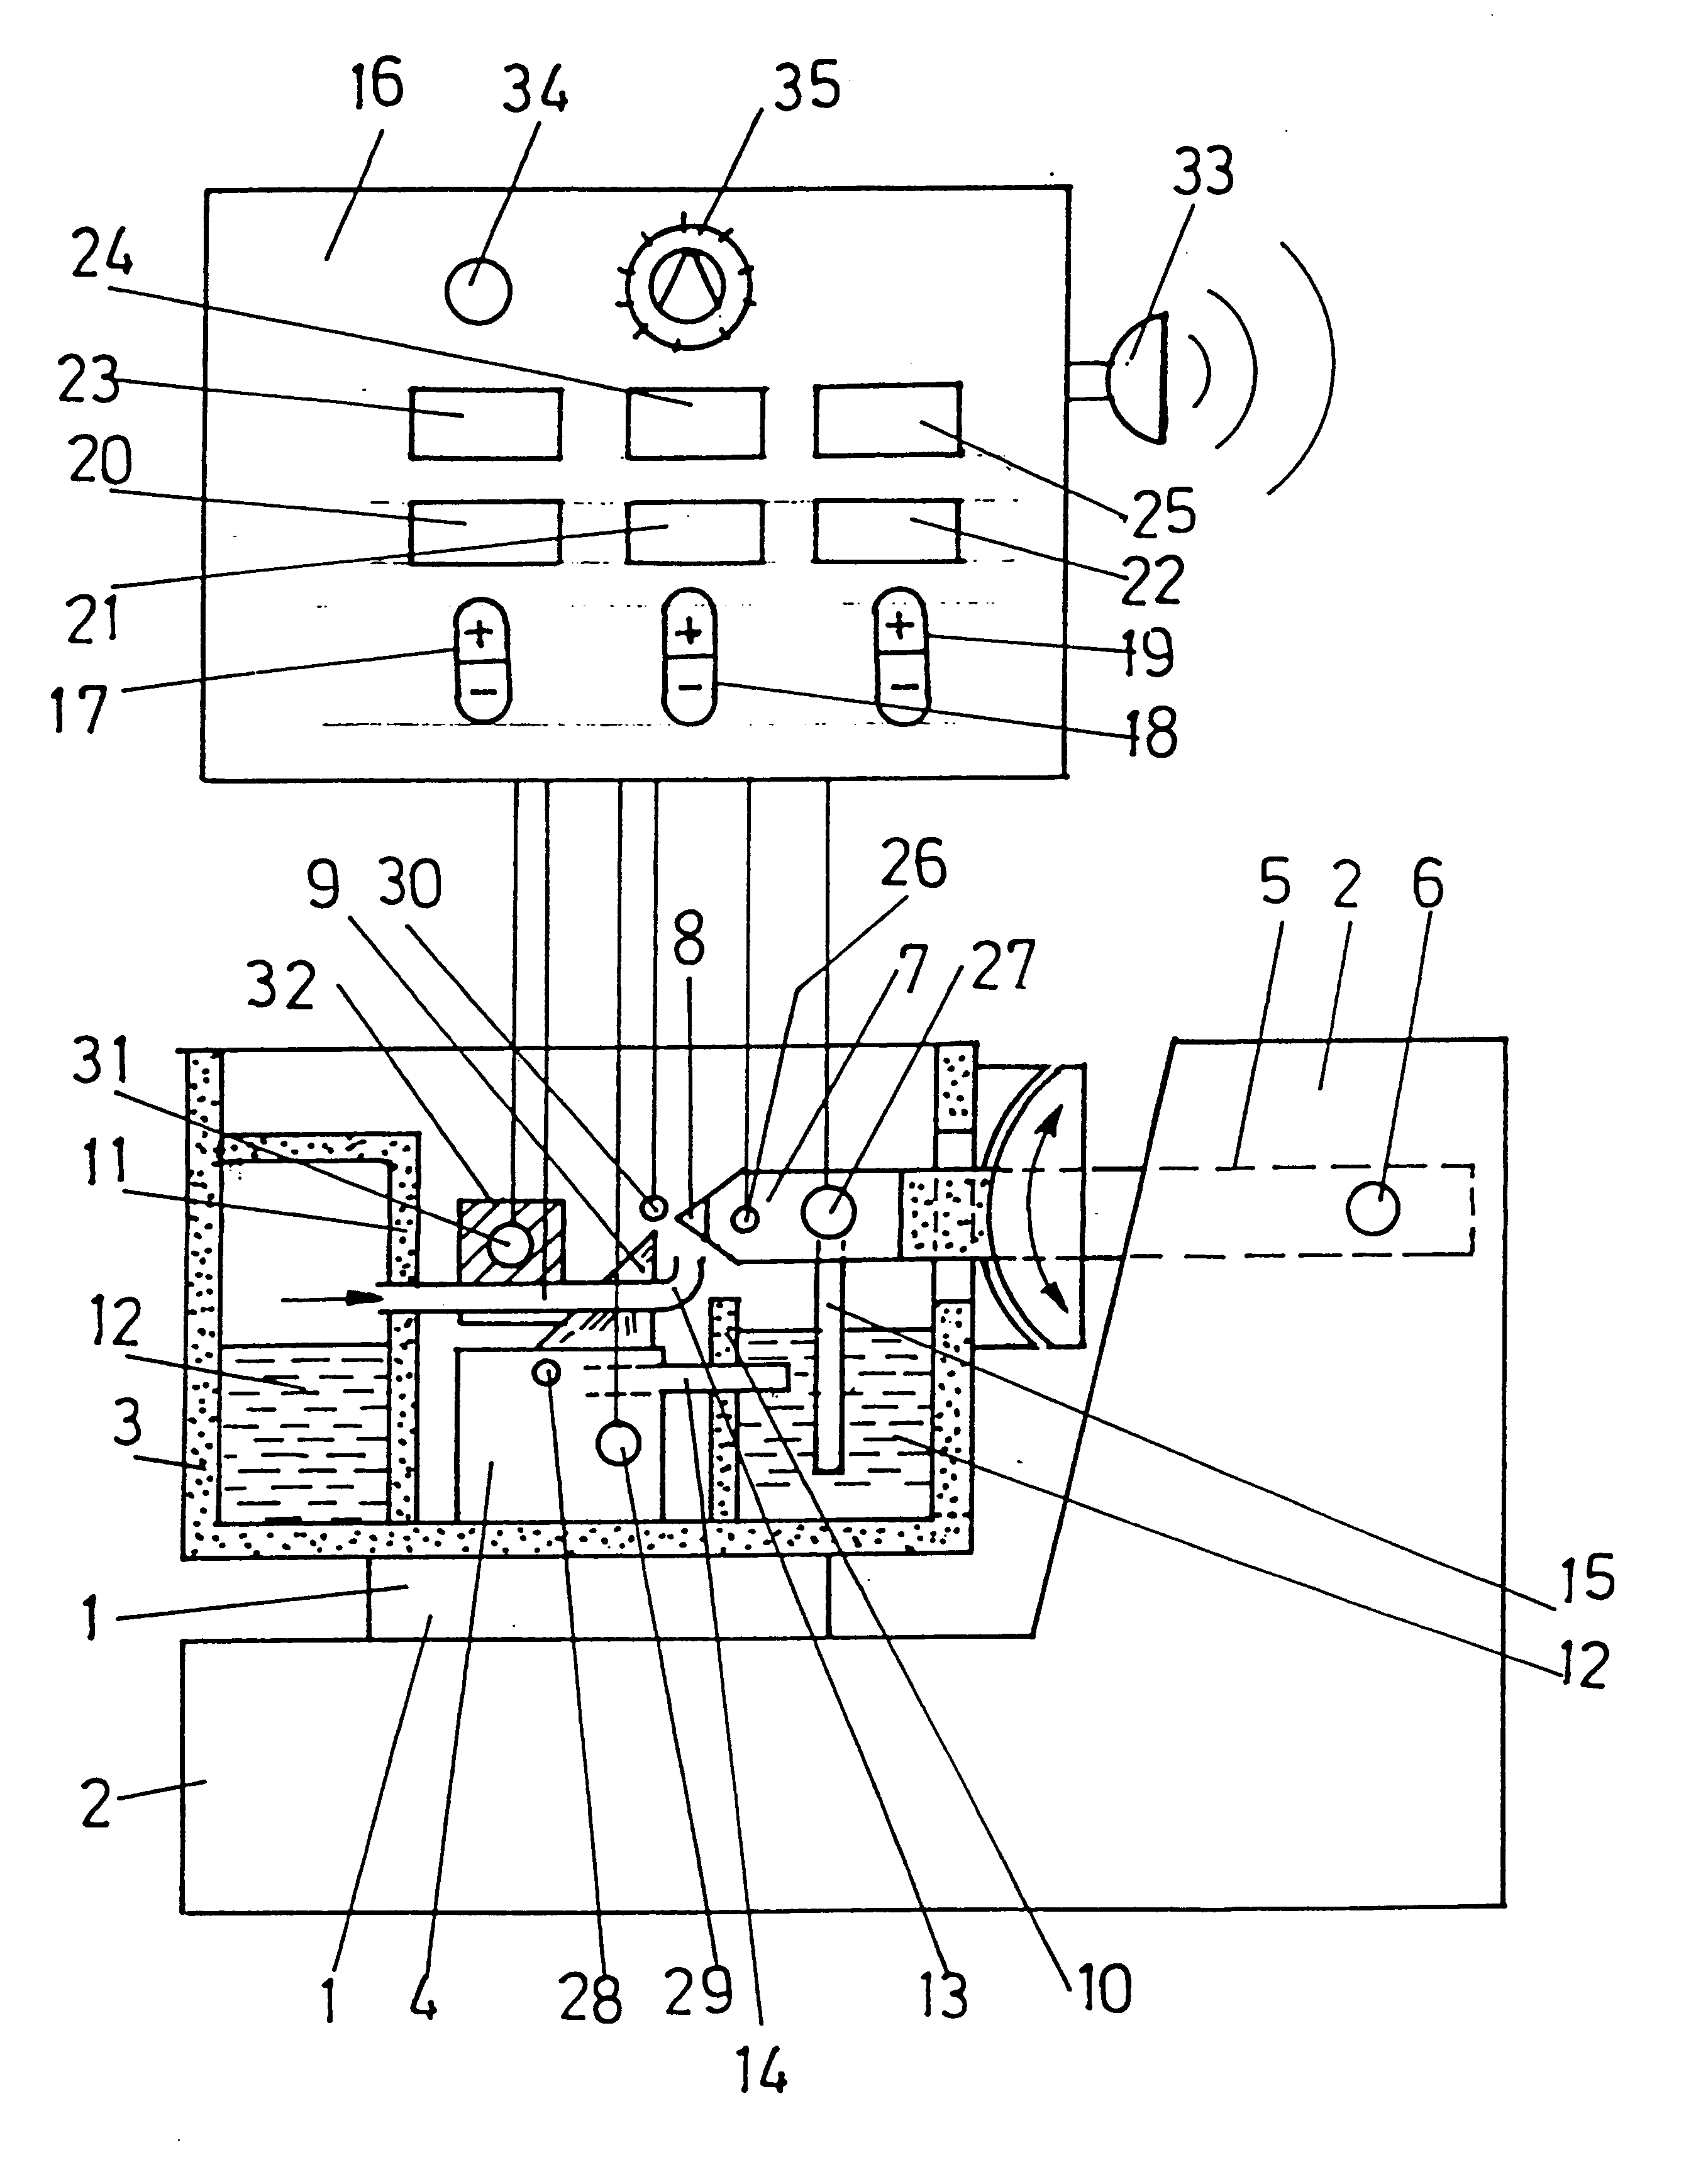 Cooling chamber temperature control device